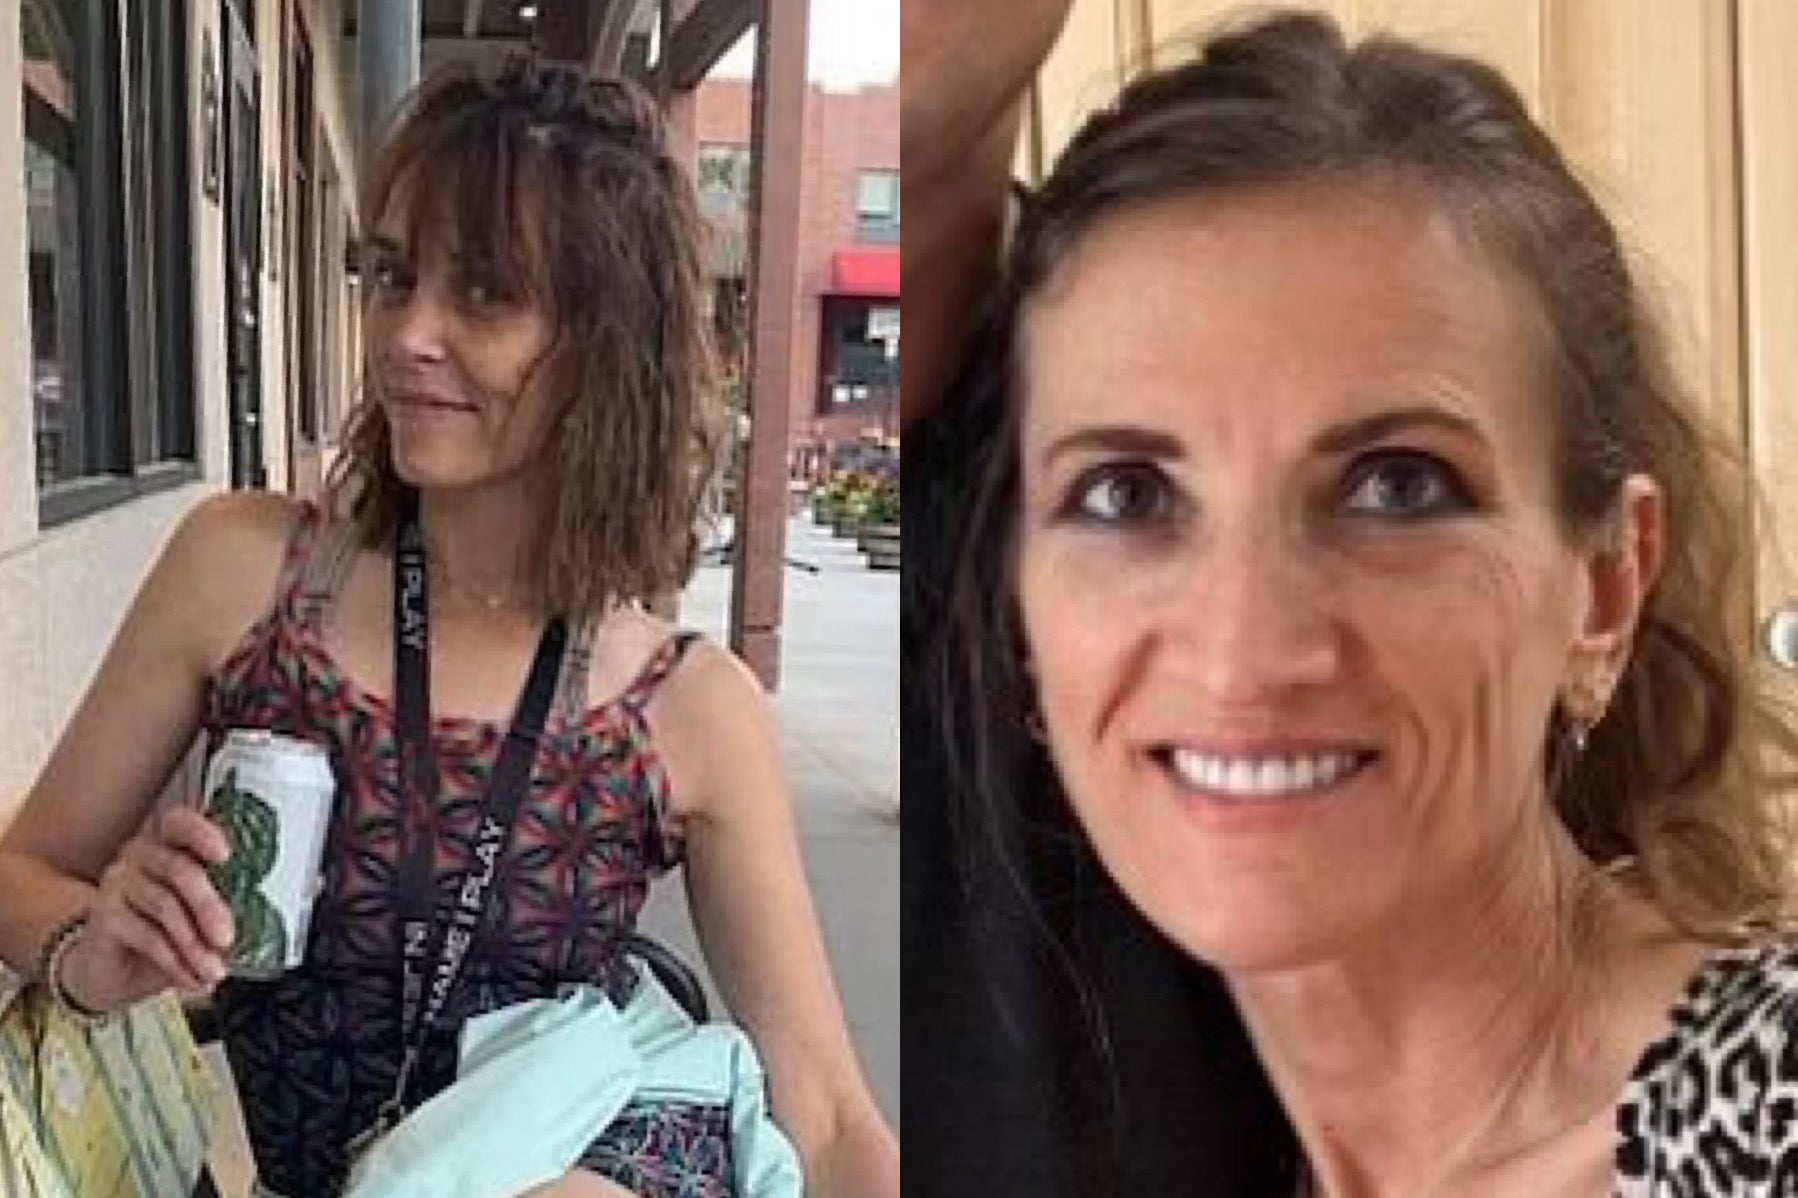 Melissa Whitsitt (left), 34, went missing on 13 August just days after police began searching for Svetlana Ustimenko (right), 55. They both vanished from a Colorado resort town